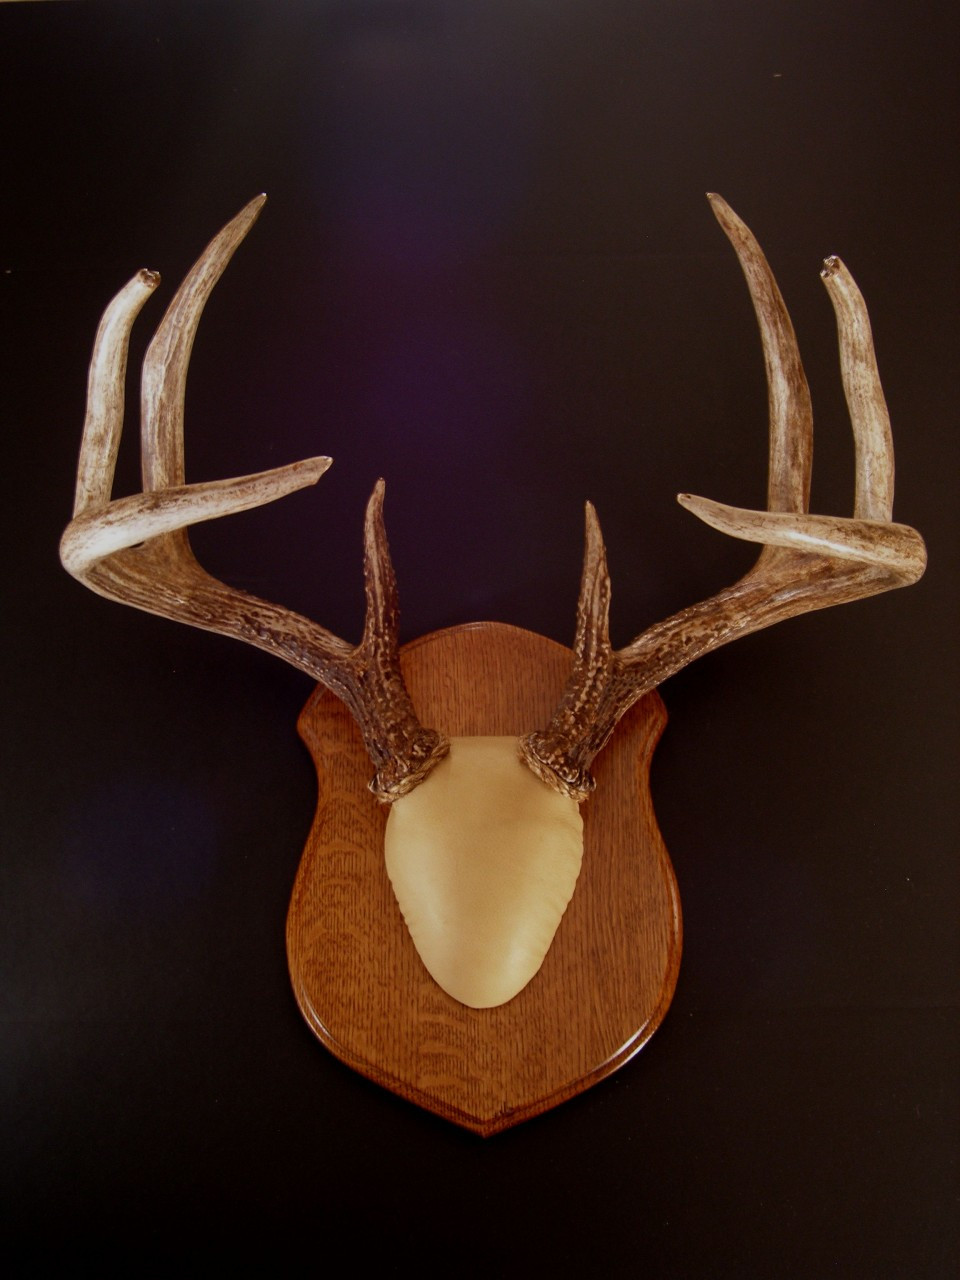 antlers-plaque-google-search-antler-wall-deer-decor-antiques